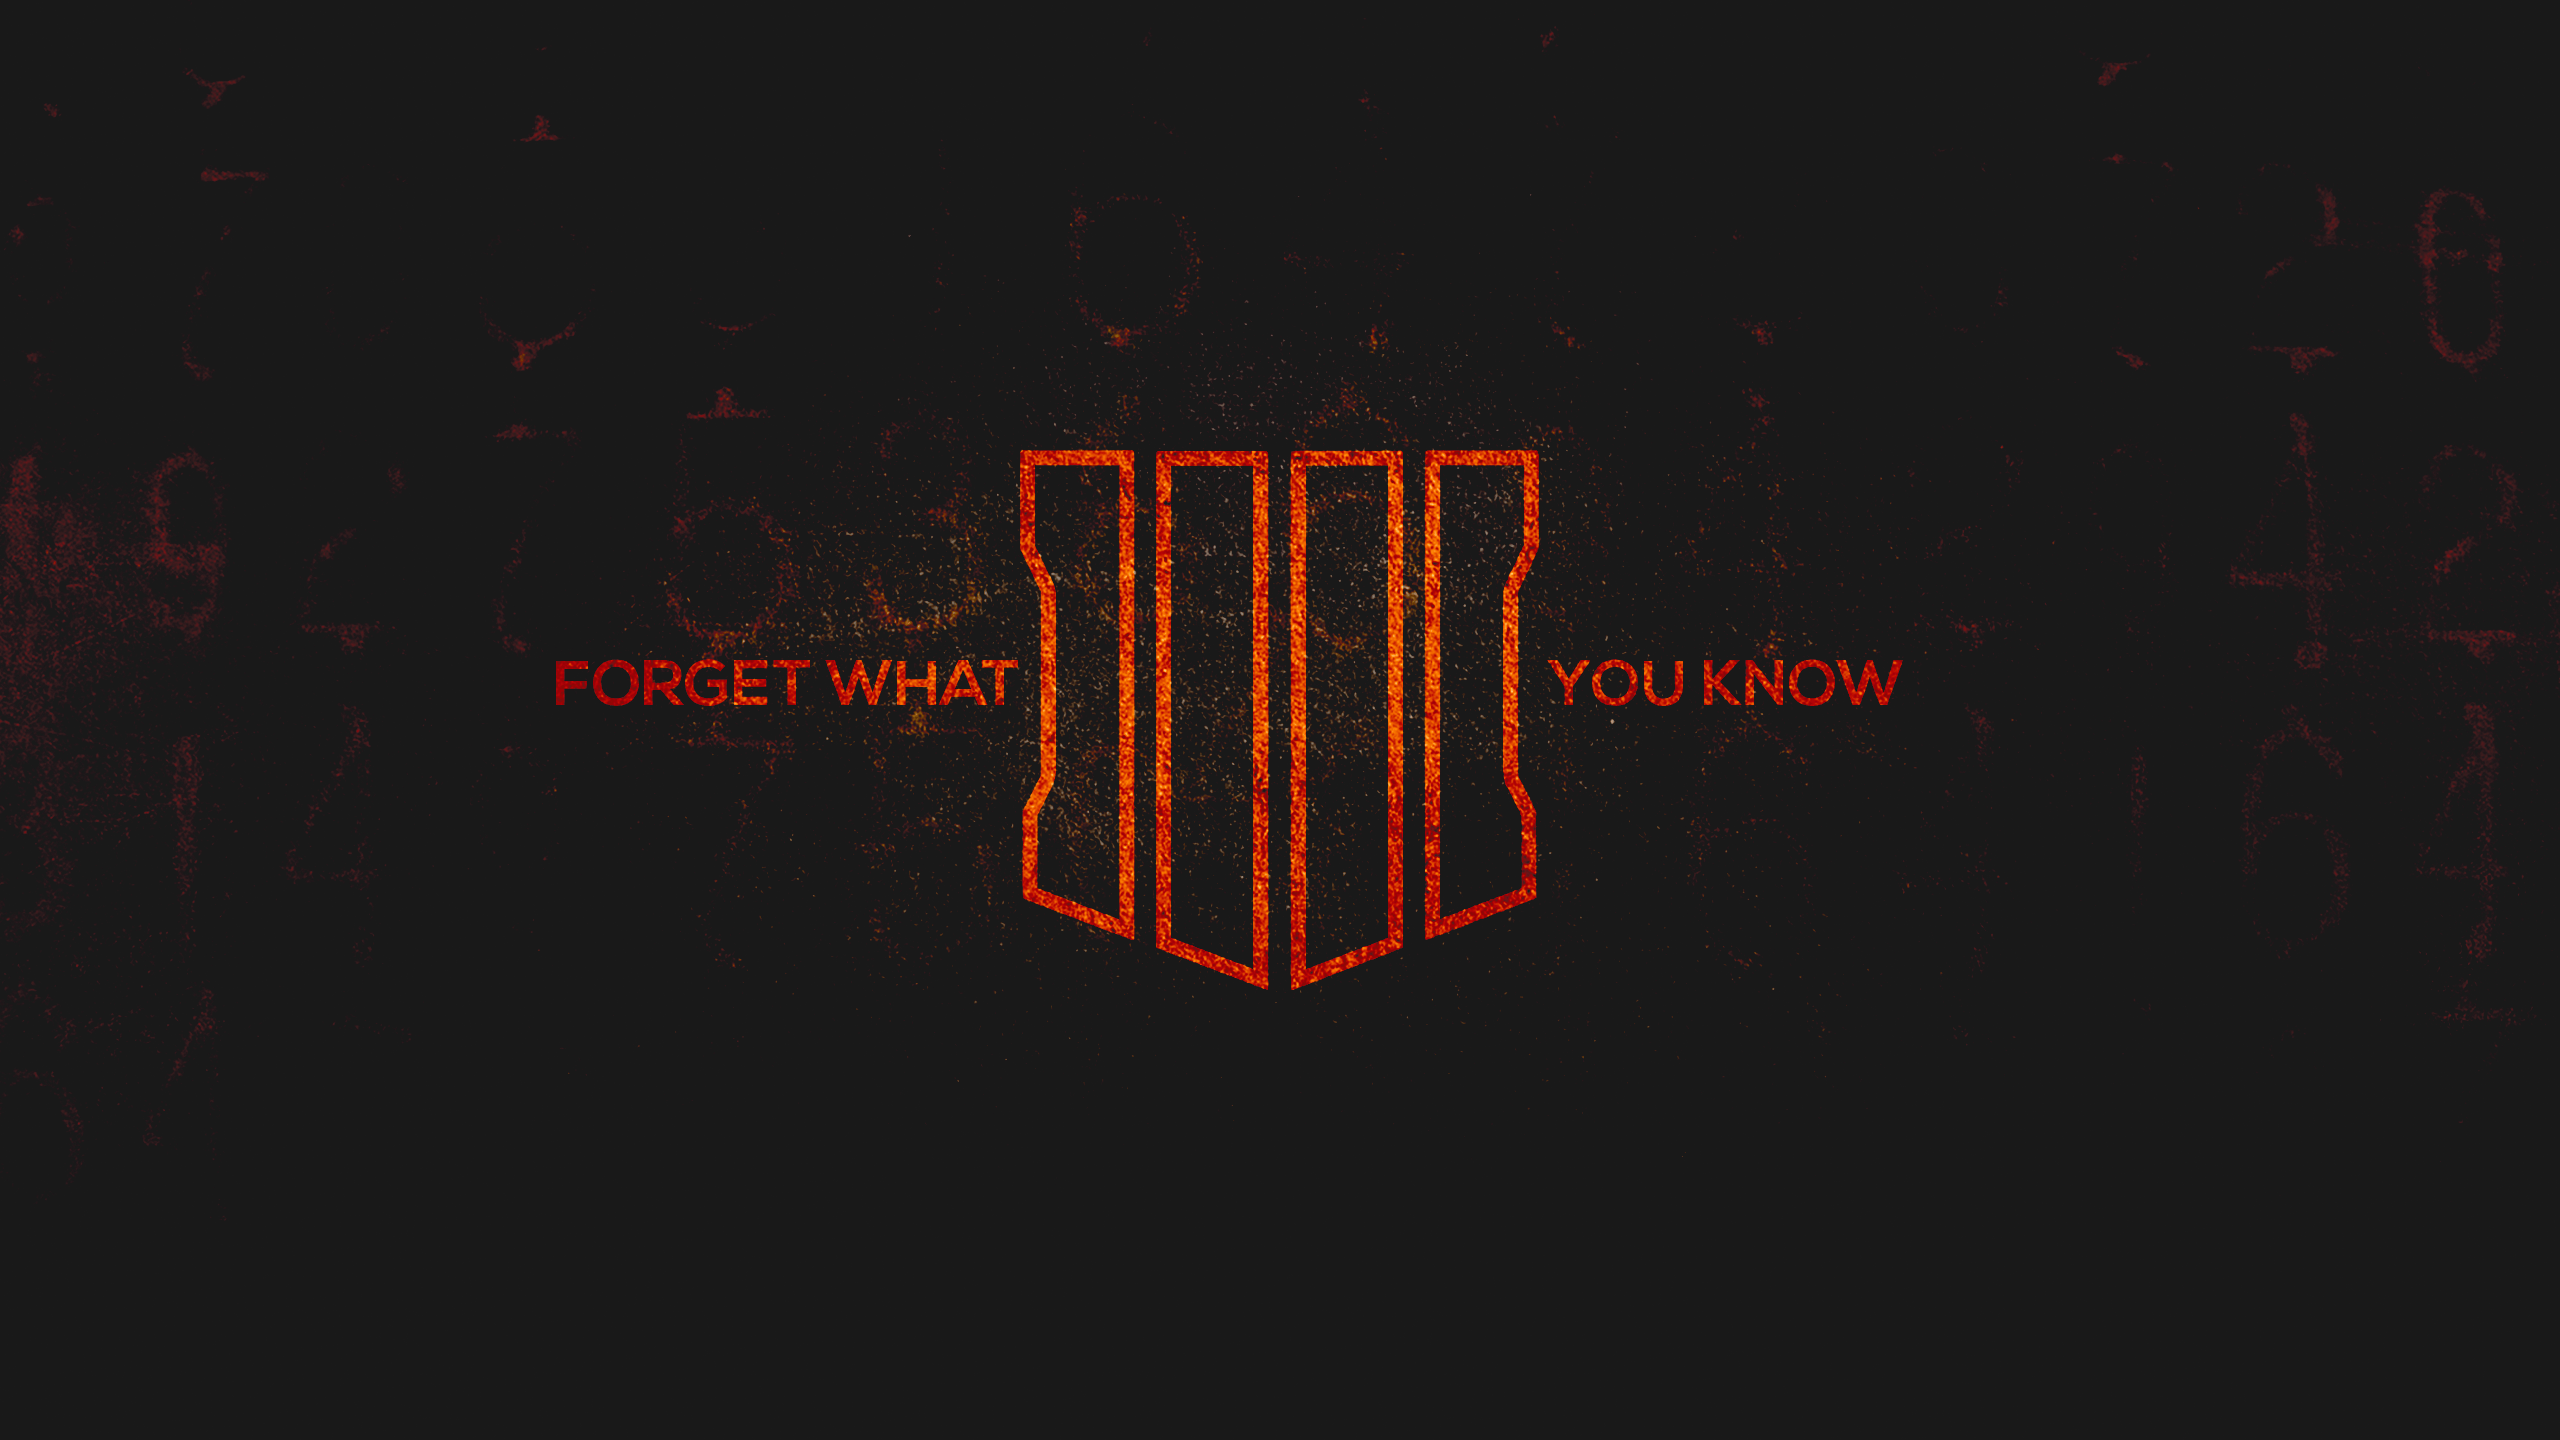 Call of Duty: BO4 (FORGET WHAT YOU KNOW) HD Wallpaper. Background